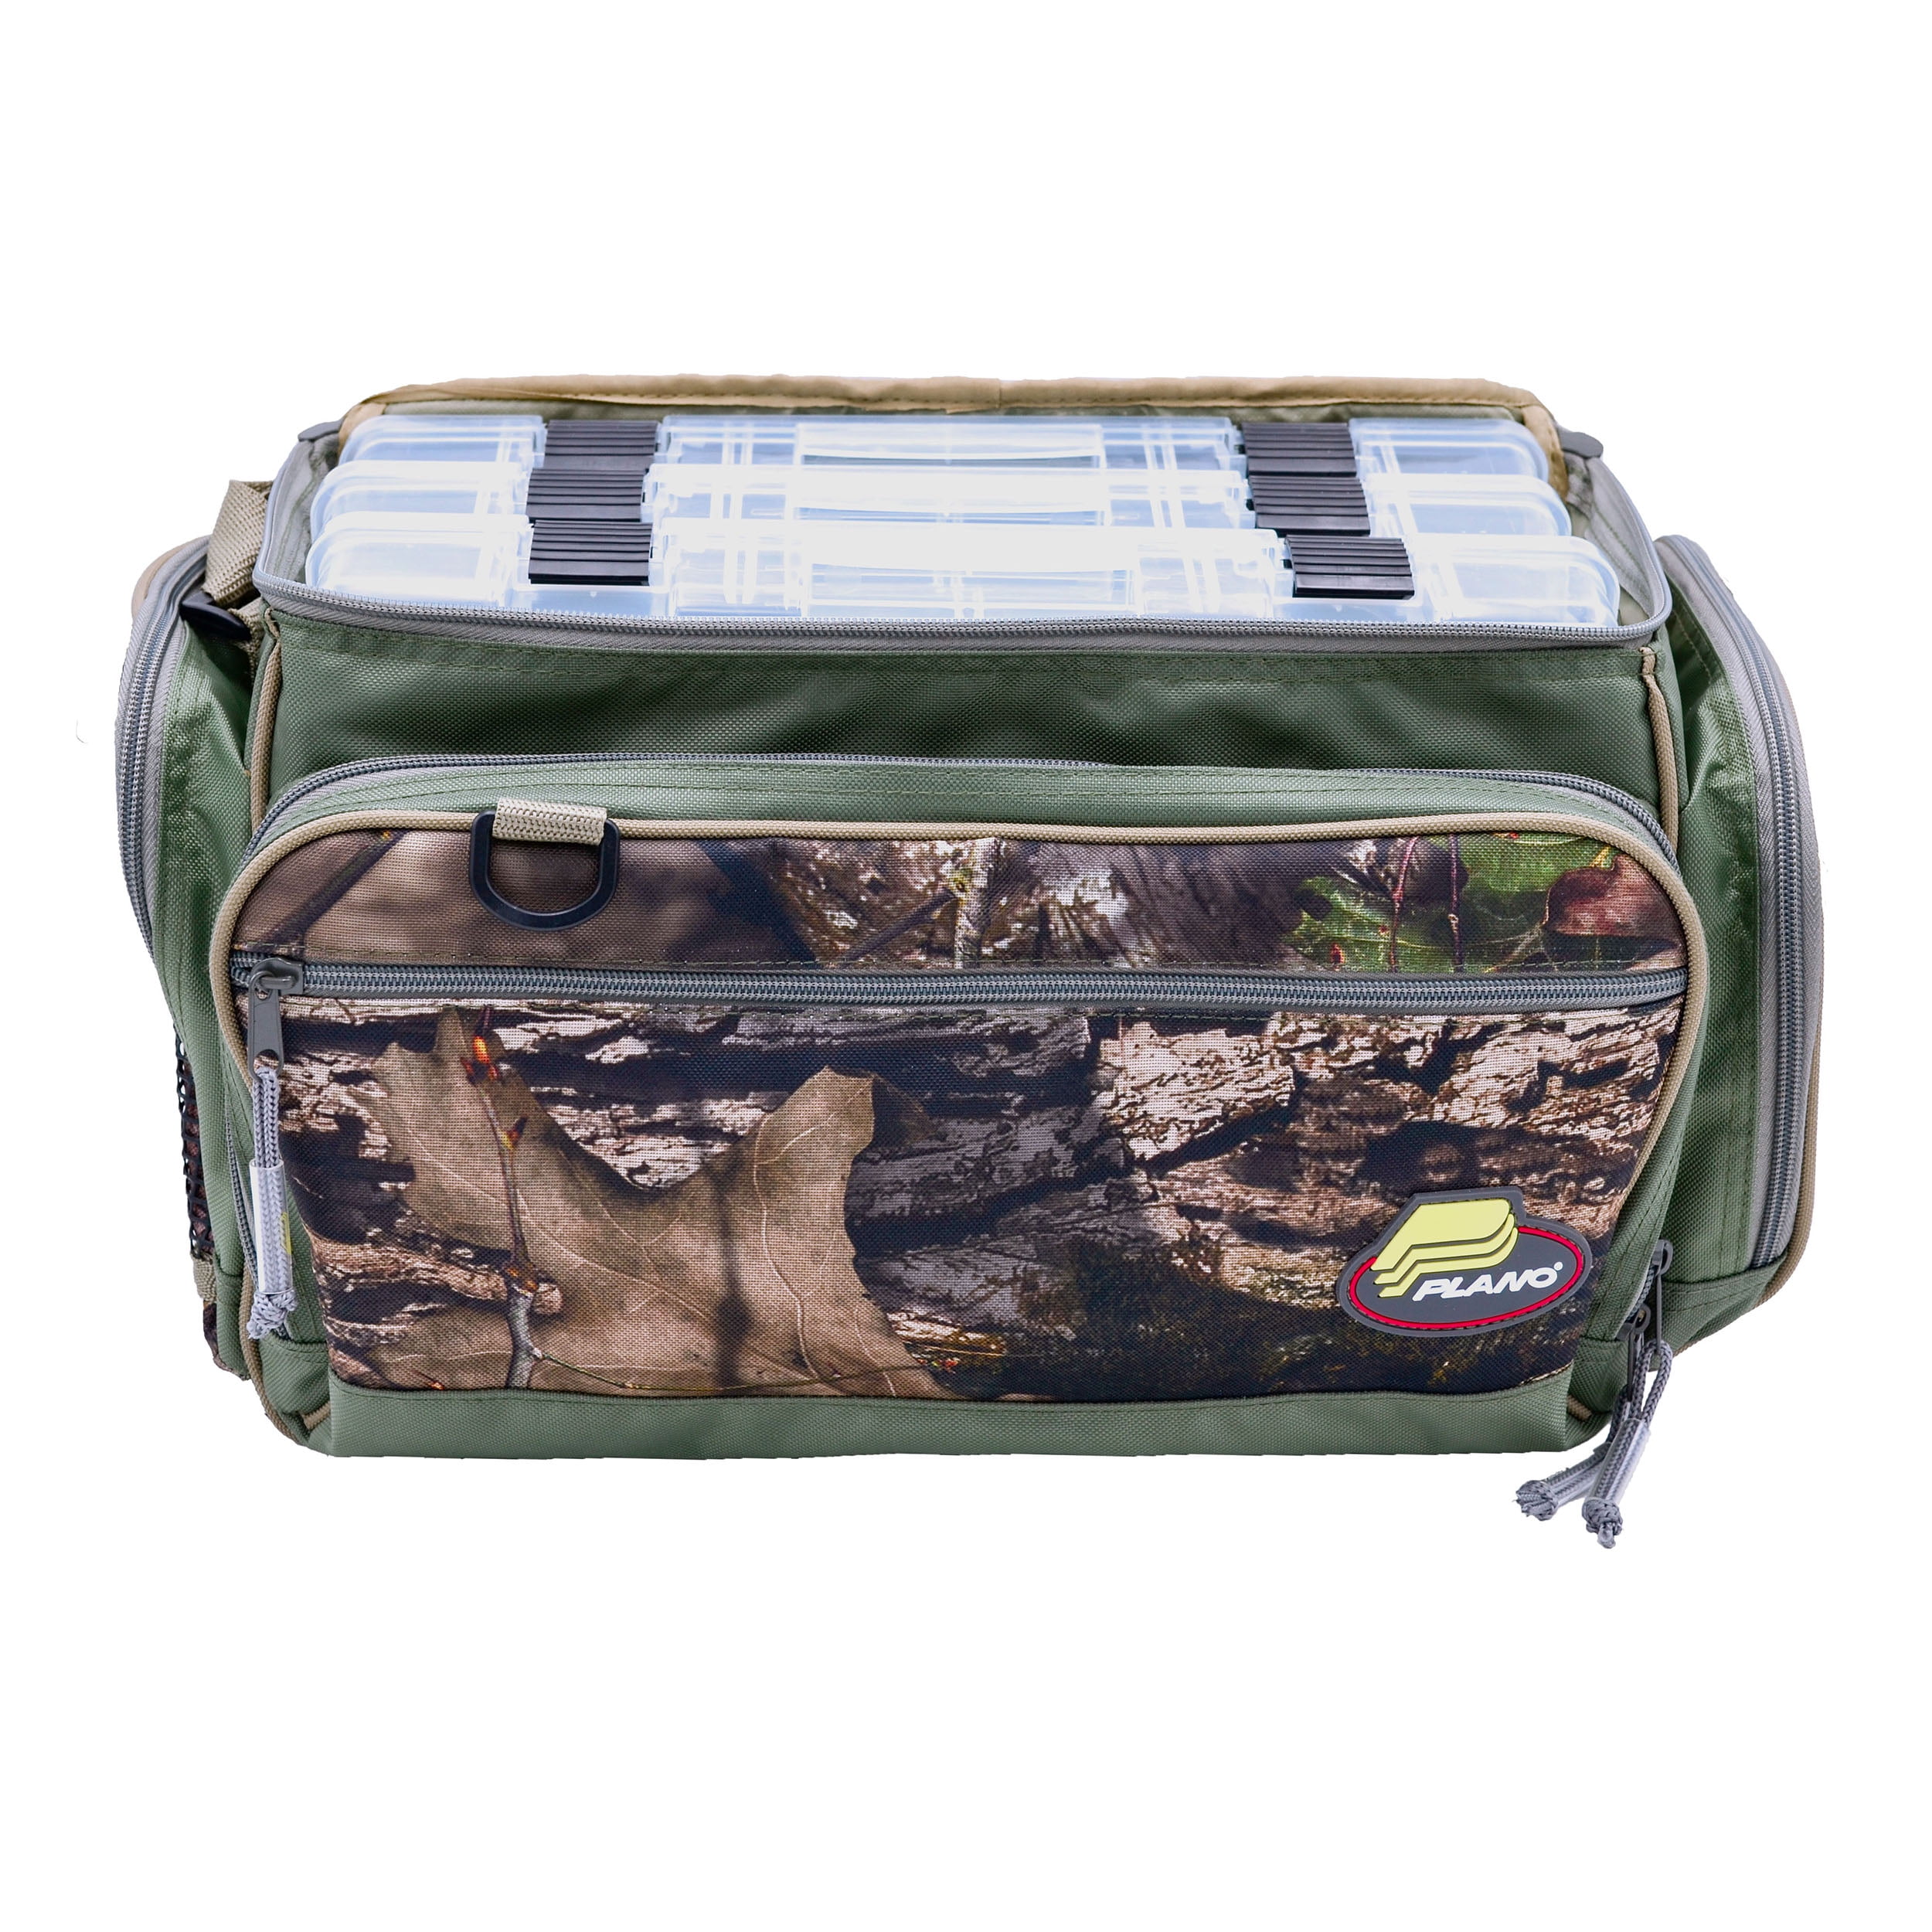 Plano Lg Mossy Oak Obsession Tackle Bag, Fishing Tackle Boxes & Bait Storage  